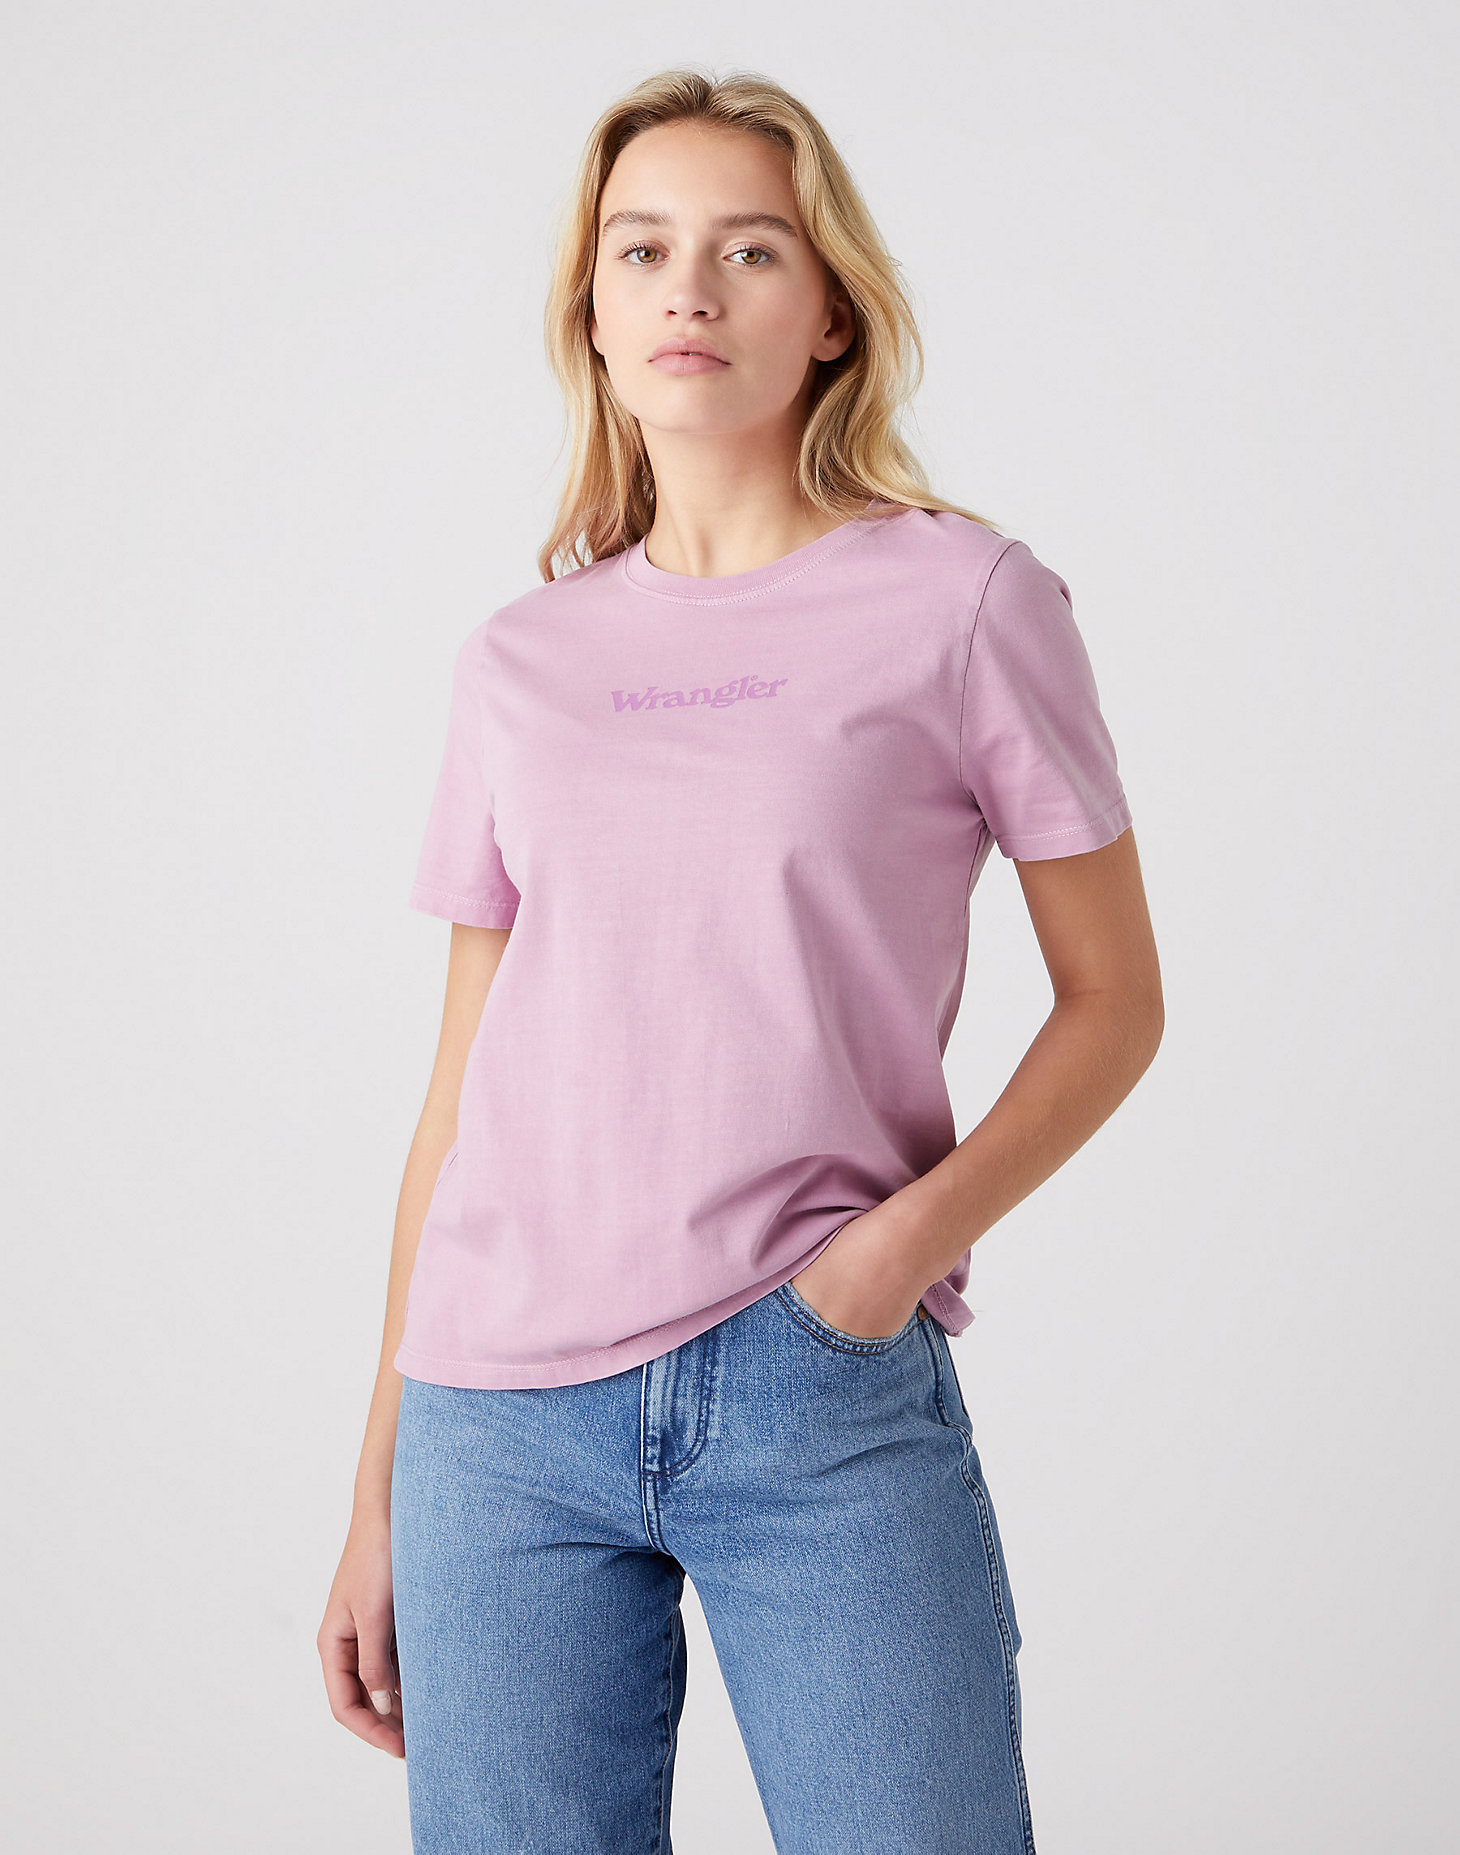 Round Tee in Natural Violet main view